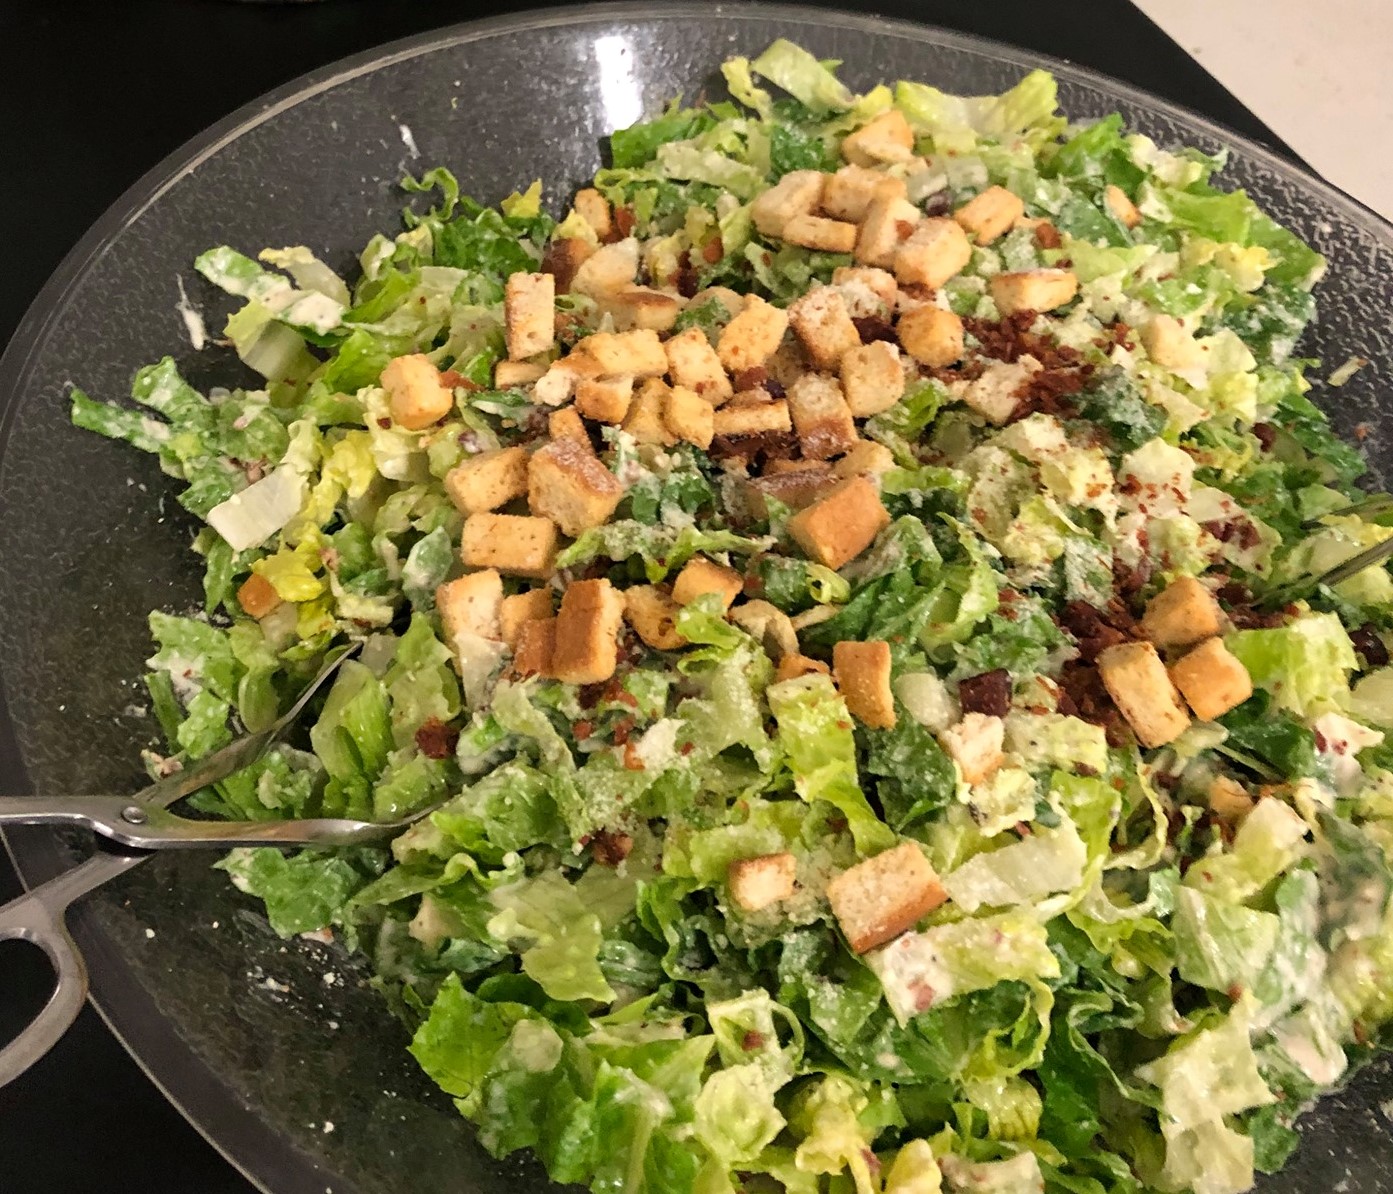 Caesar salad served by Friends Catering